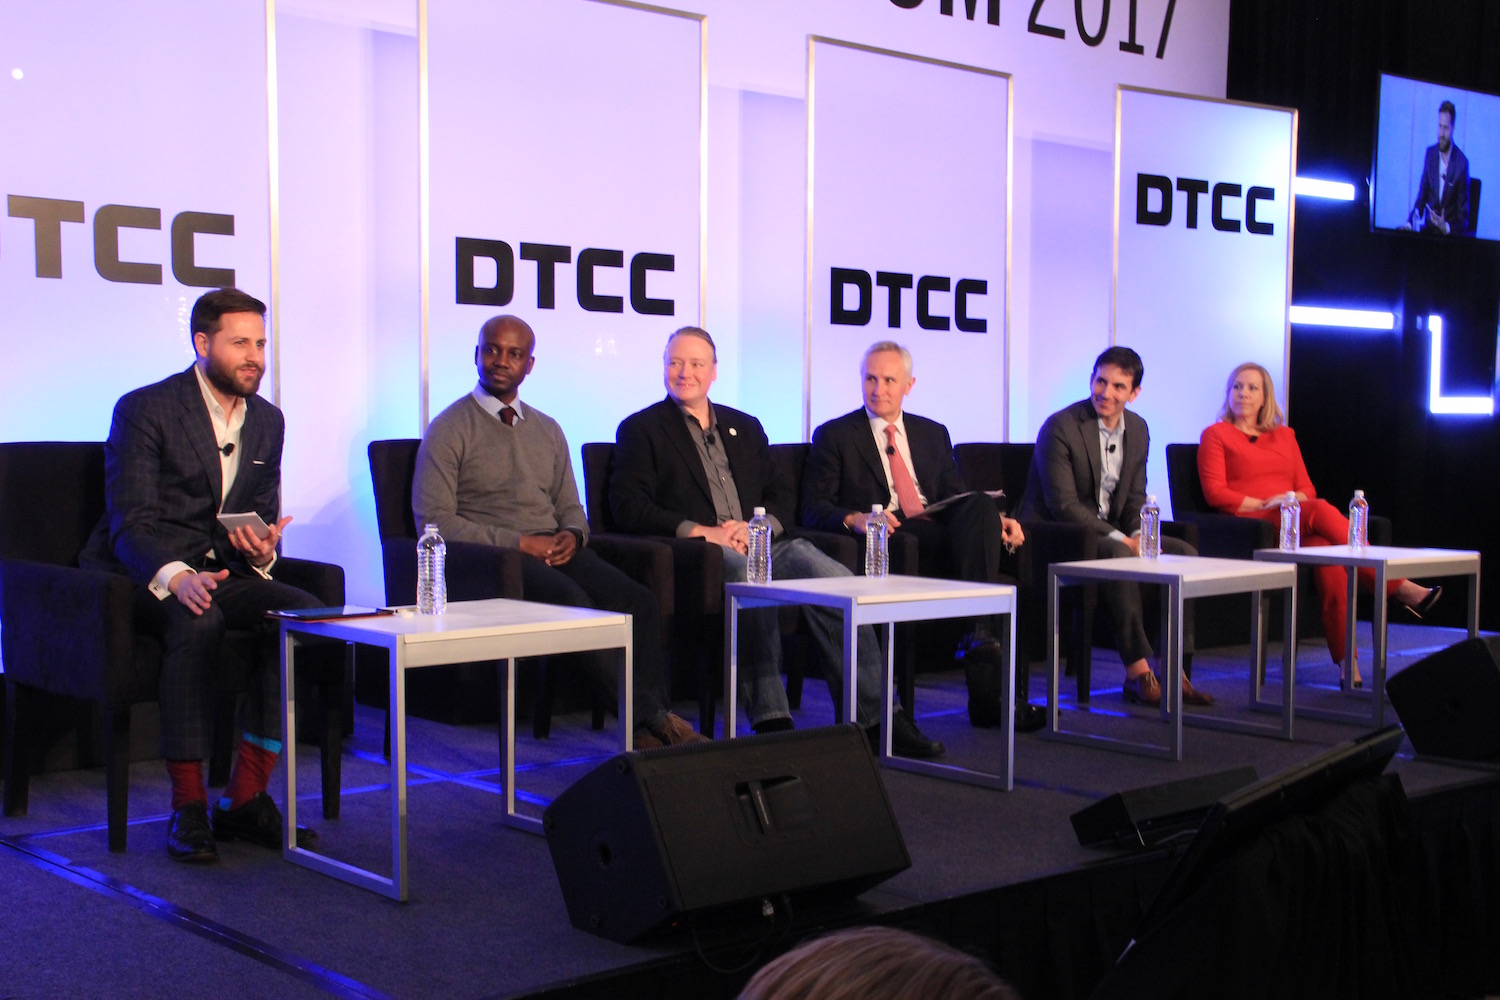 Dtcc-calls-on-banks-and-regulators-to-help-address-blockchain-security-issues